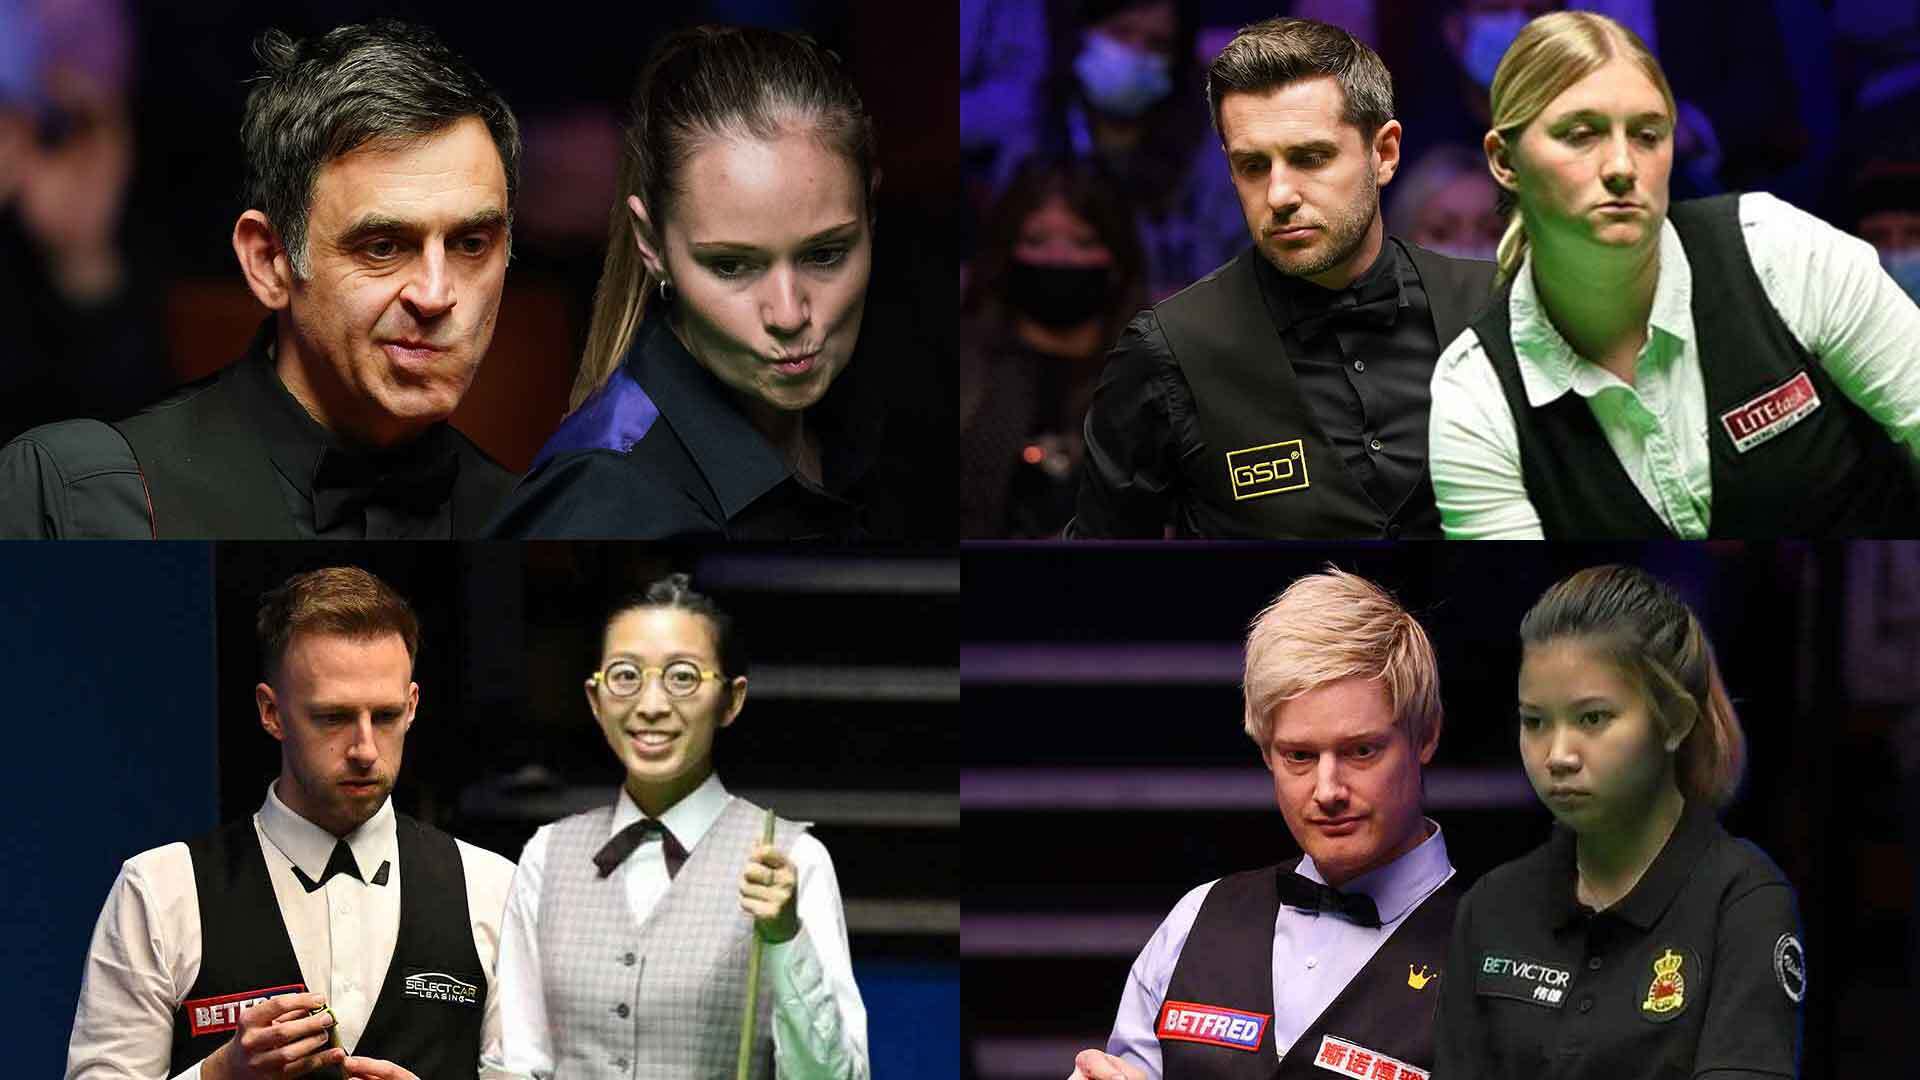 World Mixed Doubles guide Schedule, results, team line-ups and TV times for inaugural snooker event